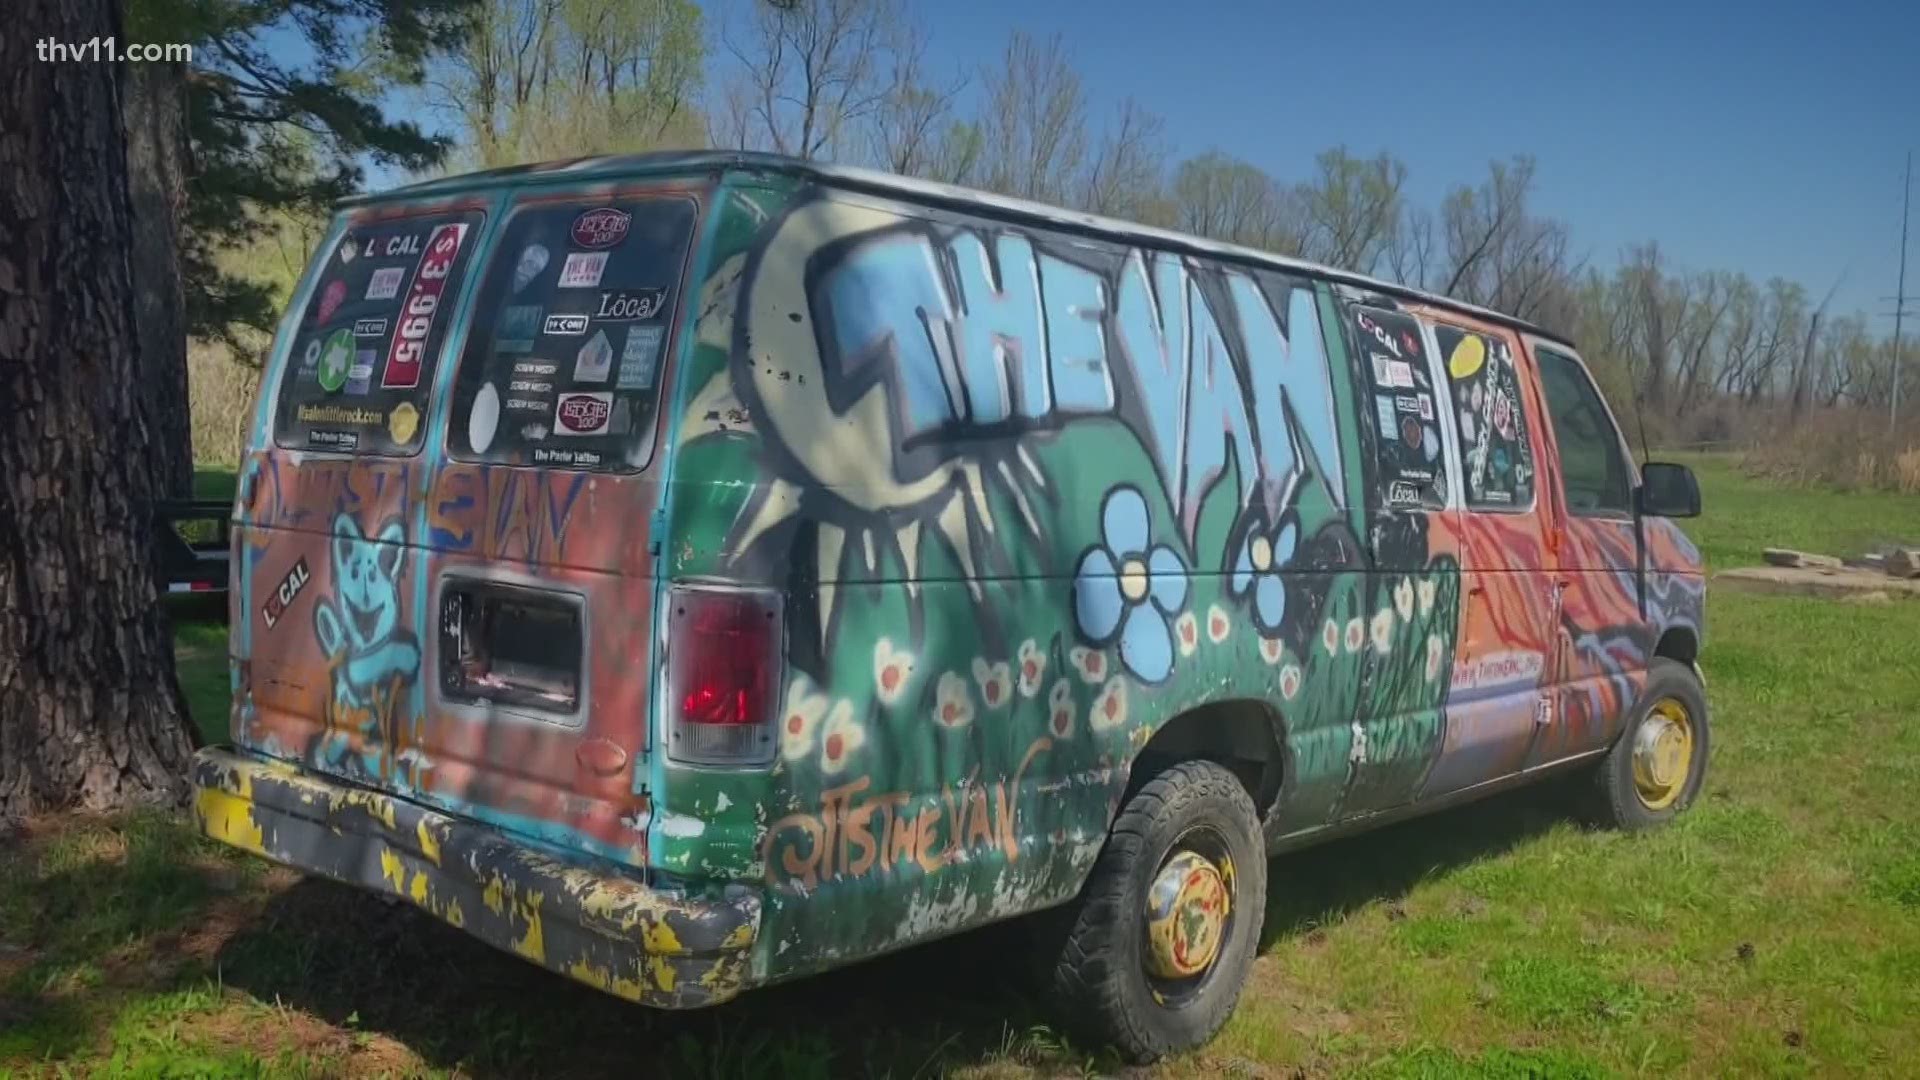 There's an advocacy group called "The One, Inc."
It originated as a single van and driver, traveling around Little Rock to help homeless people. Now, it's much more.